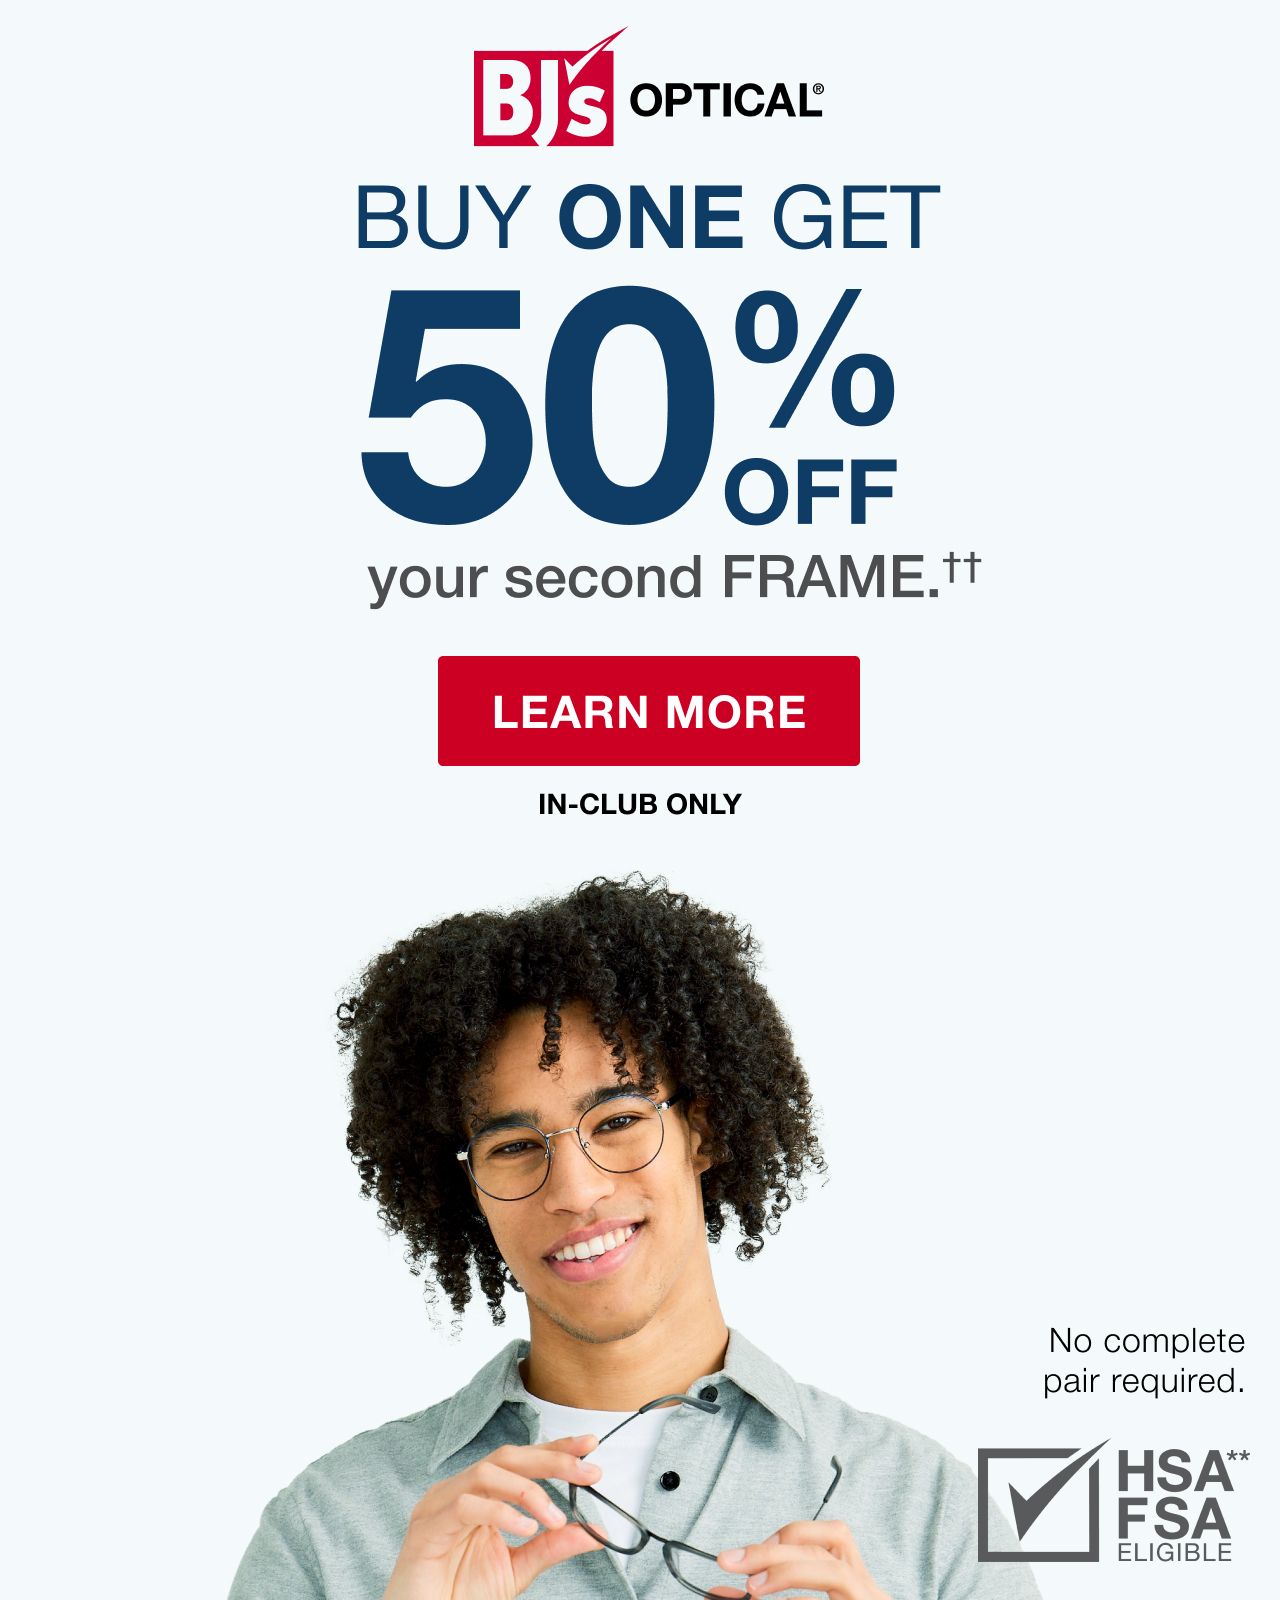 BJ's Optical®. Buy One, Get 50% off your second frame.†† No complete pair required. Click here to shop now.